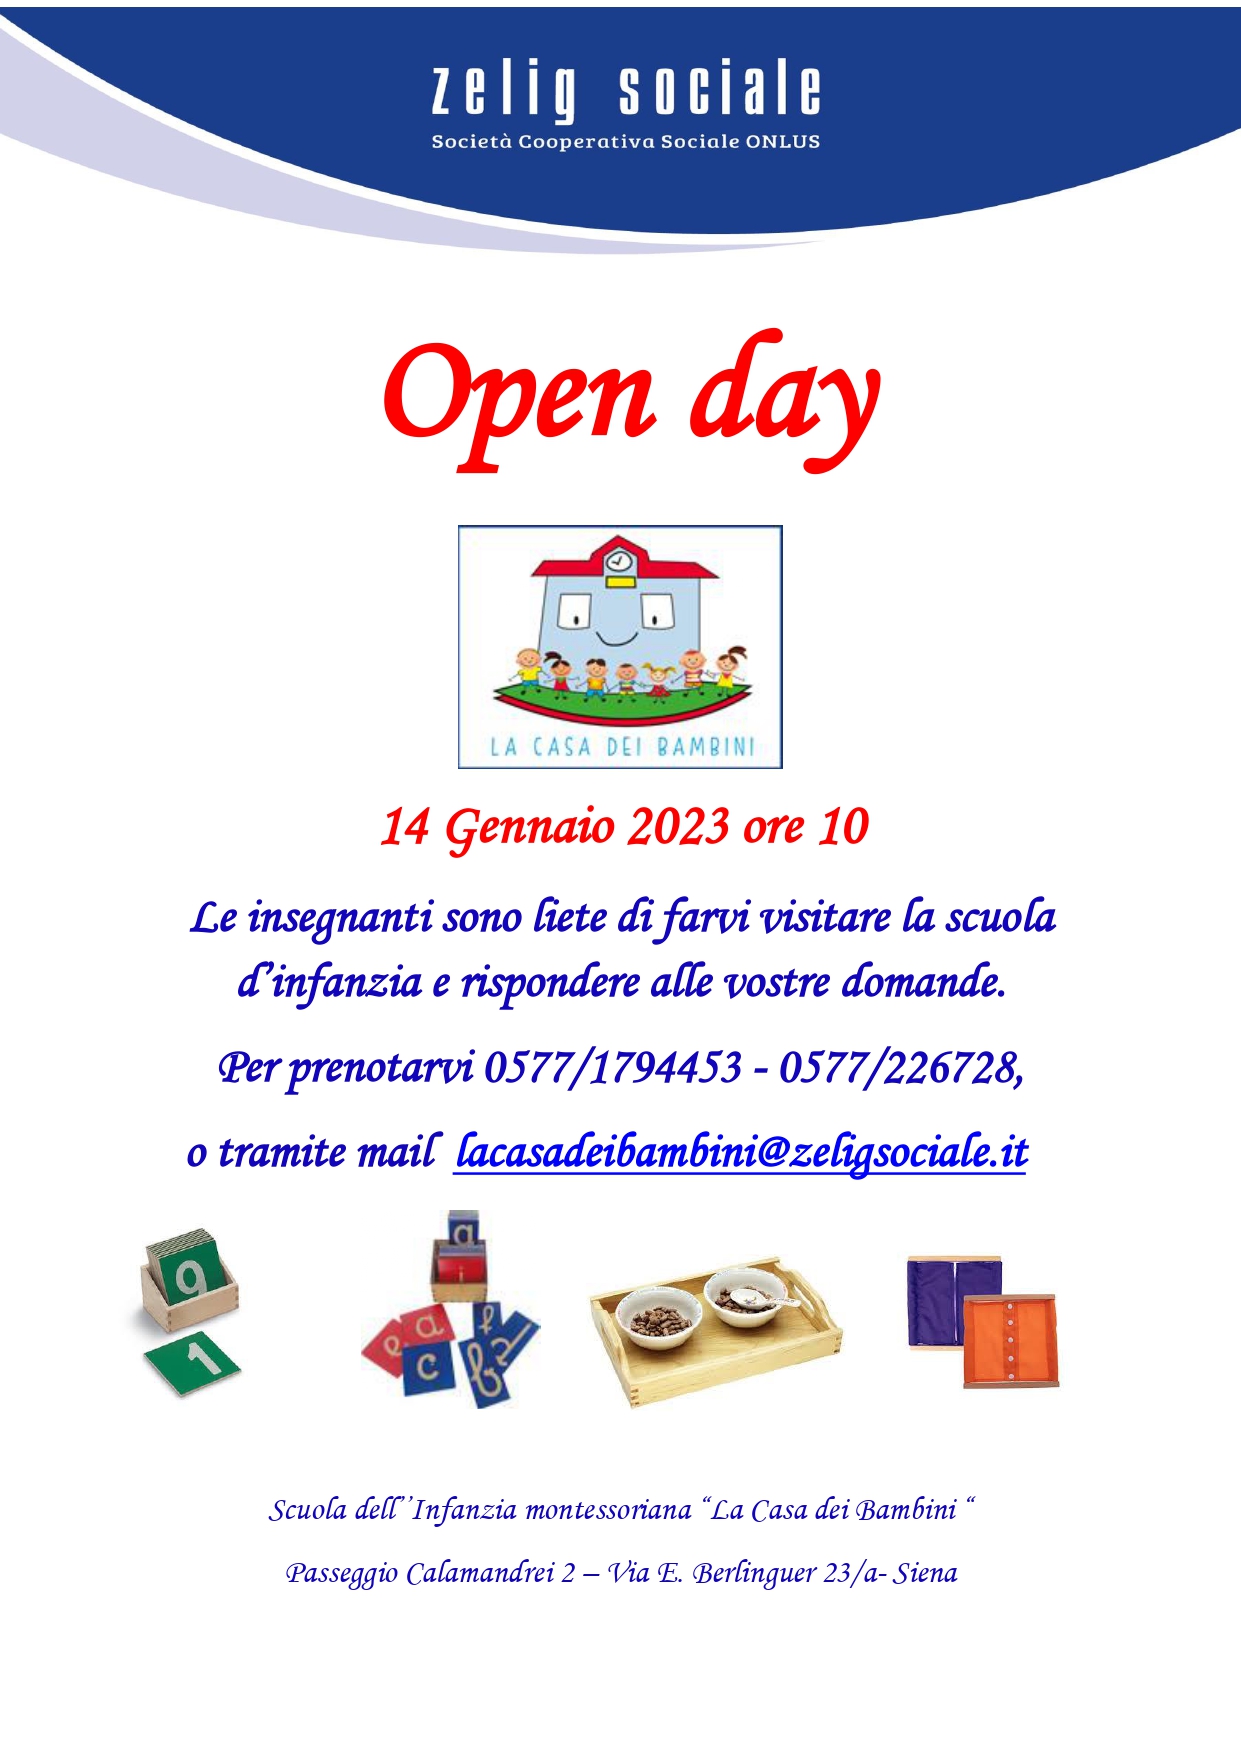 OPENDAY23